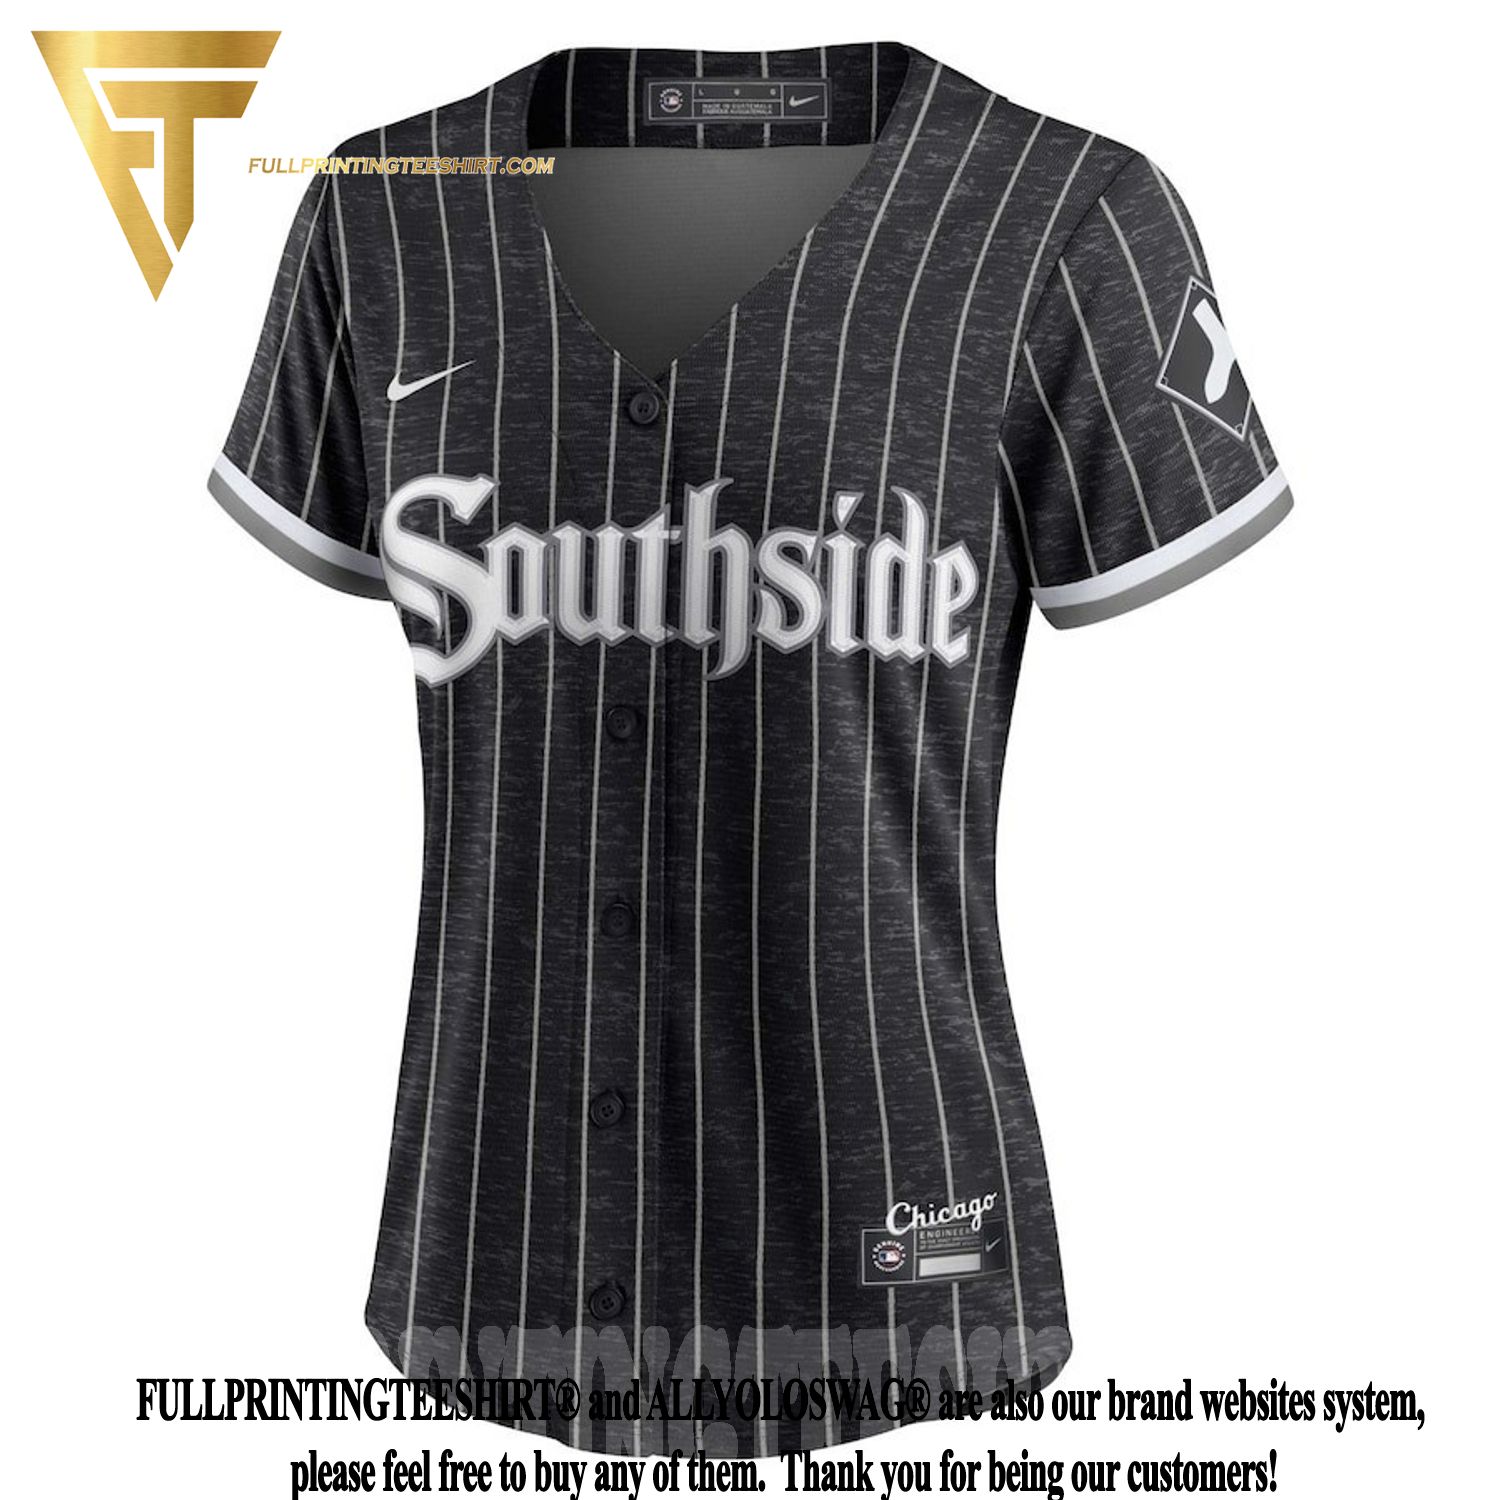 White Sox Represent the Southside with New City Connect Uniform